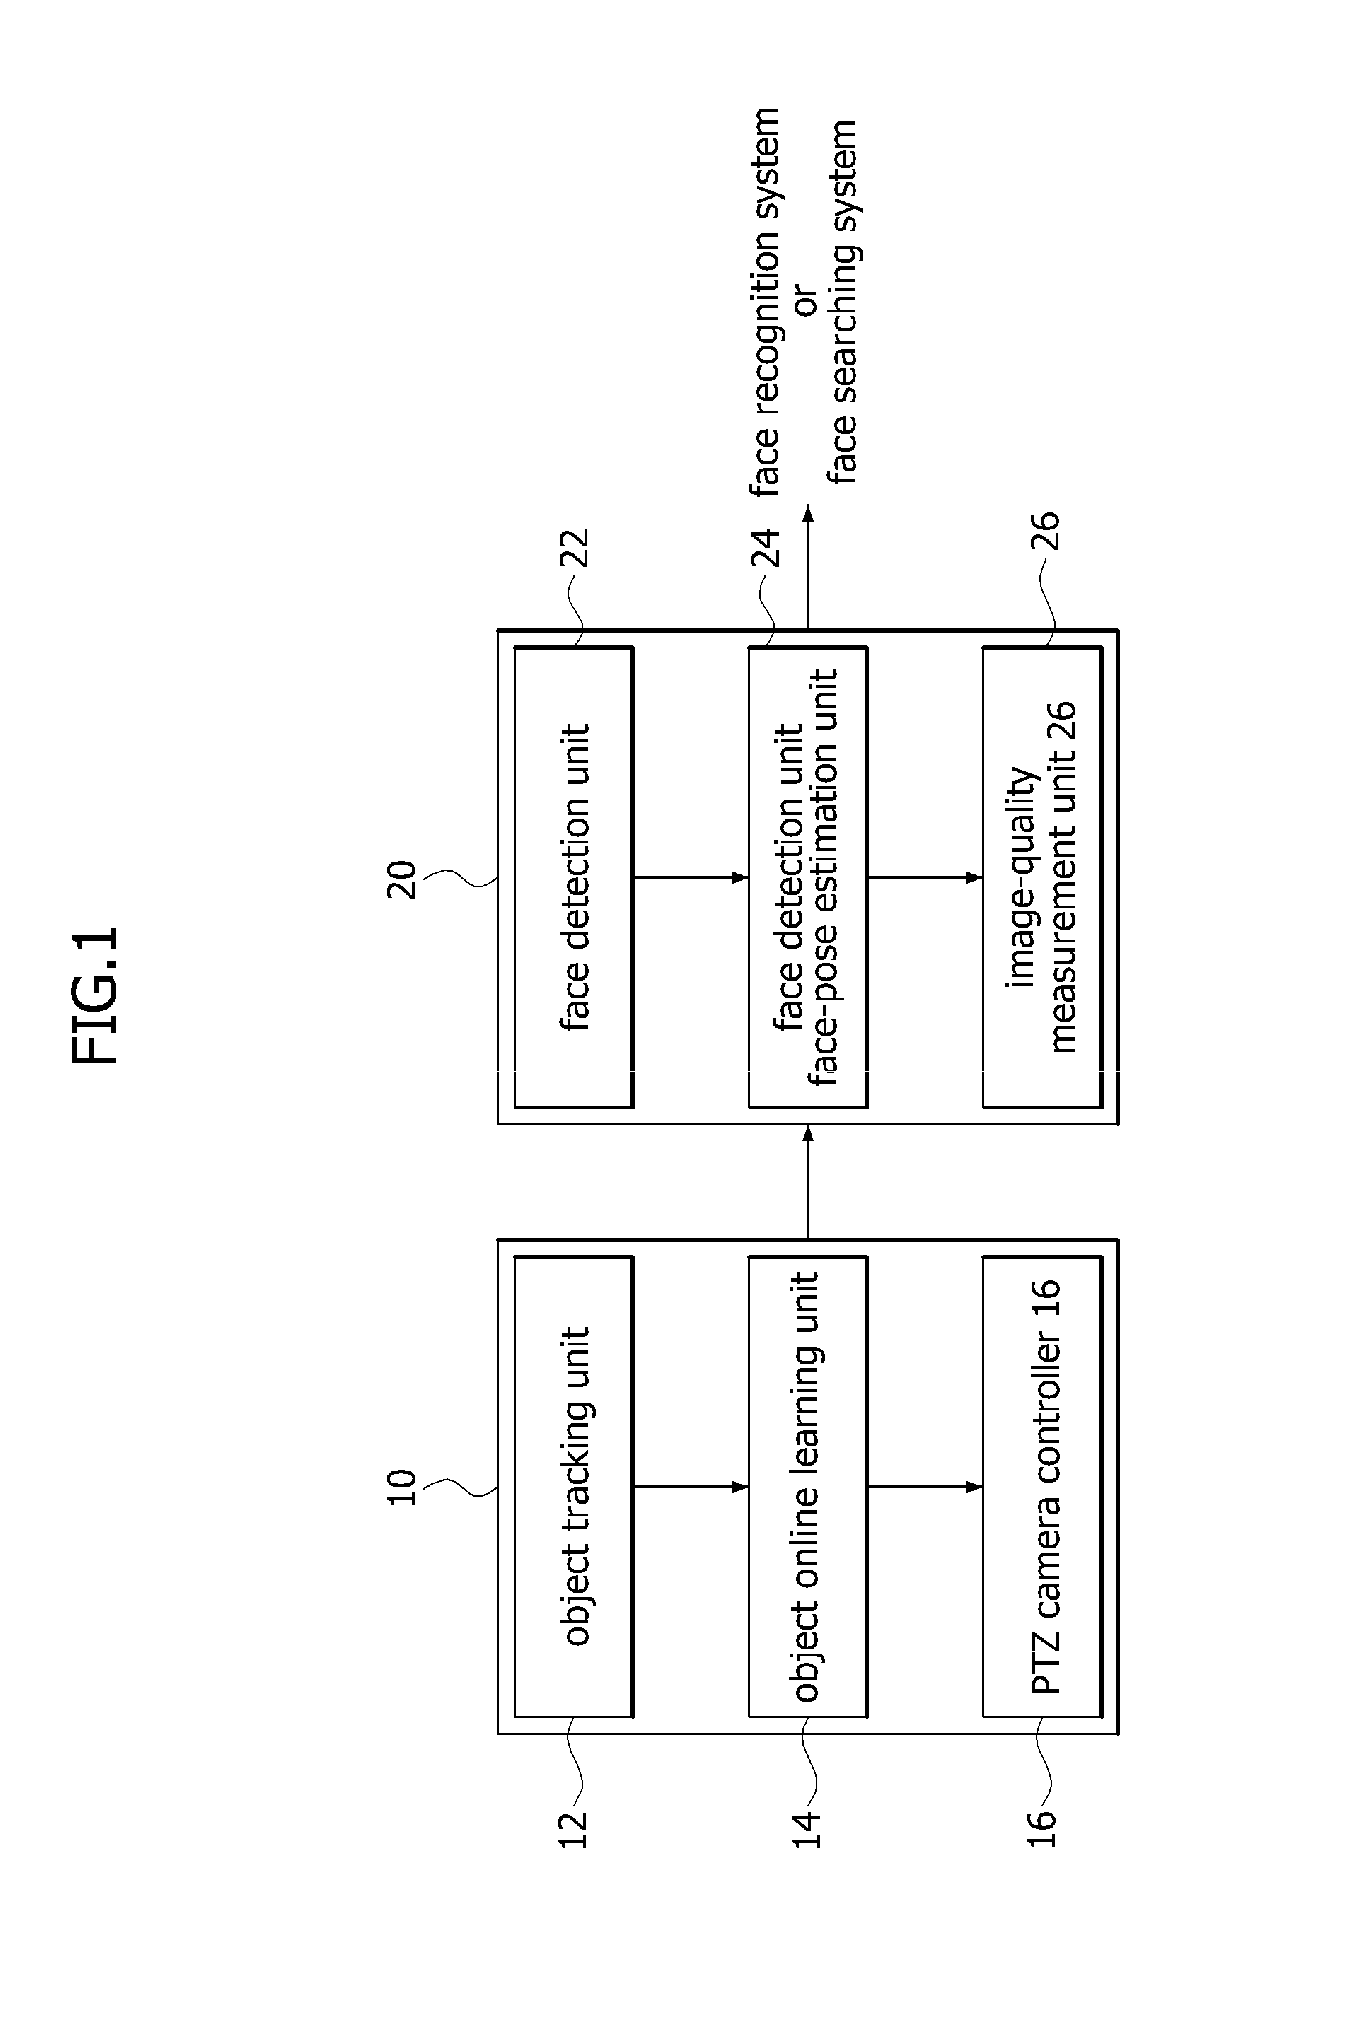 Apparatus and method for acquiring face image using multiple cameras so as to identify human located at remote site